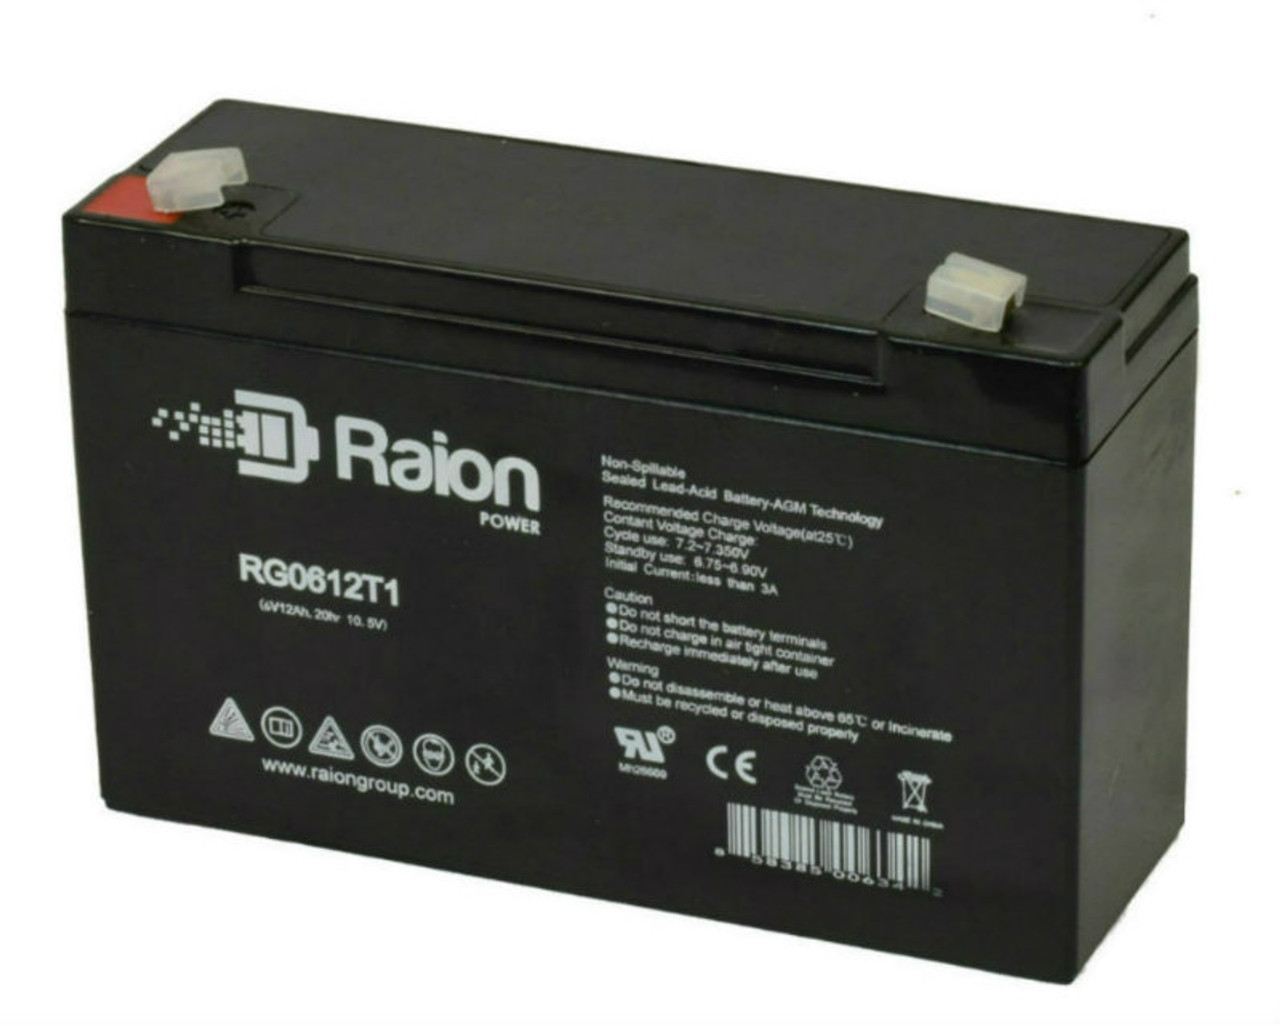 Raion Power RG06120T1 Replacement Battery for Genesis NP10-6